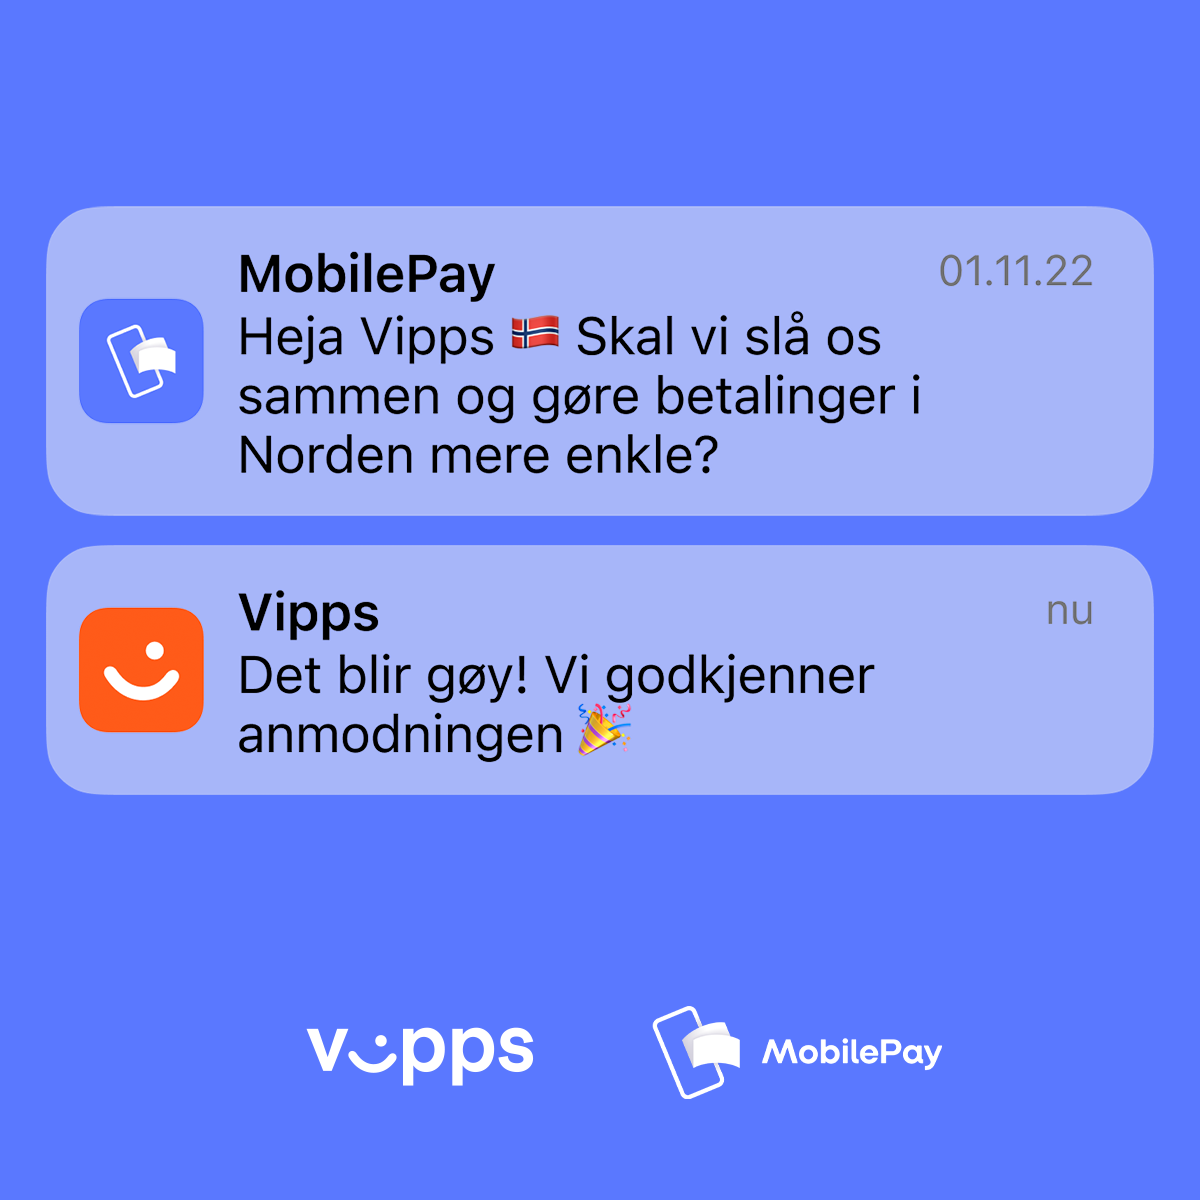 Image showing a push notification-conversation between Vipps and MobilePay.